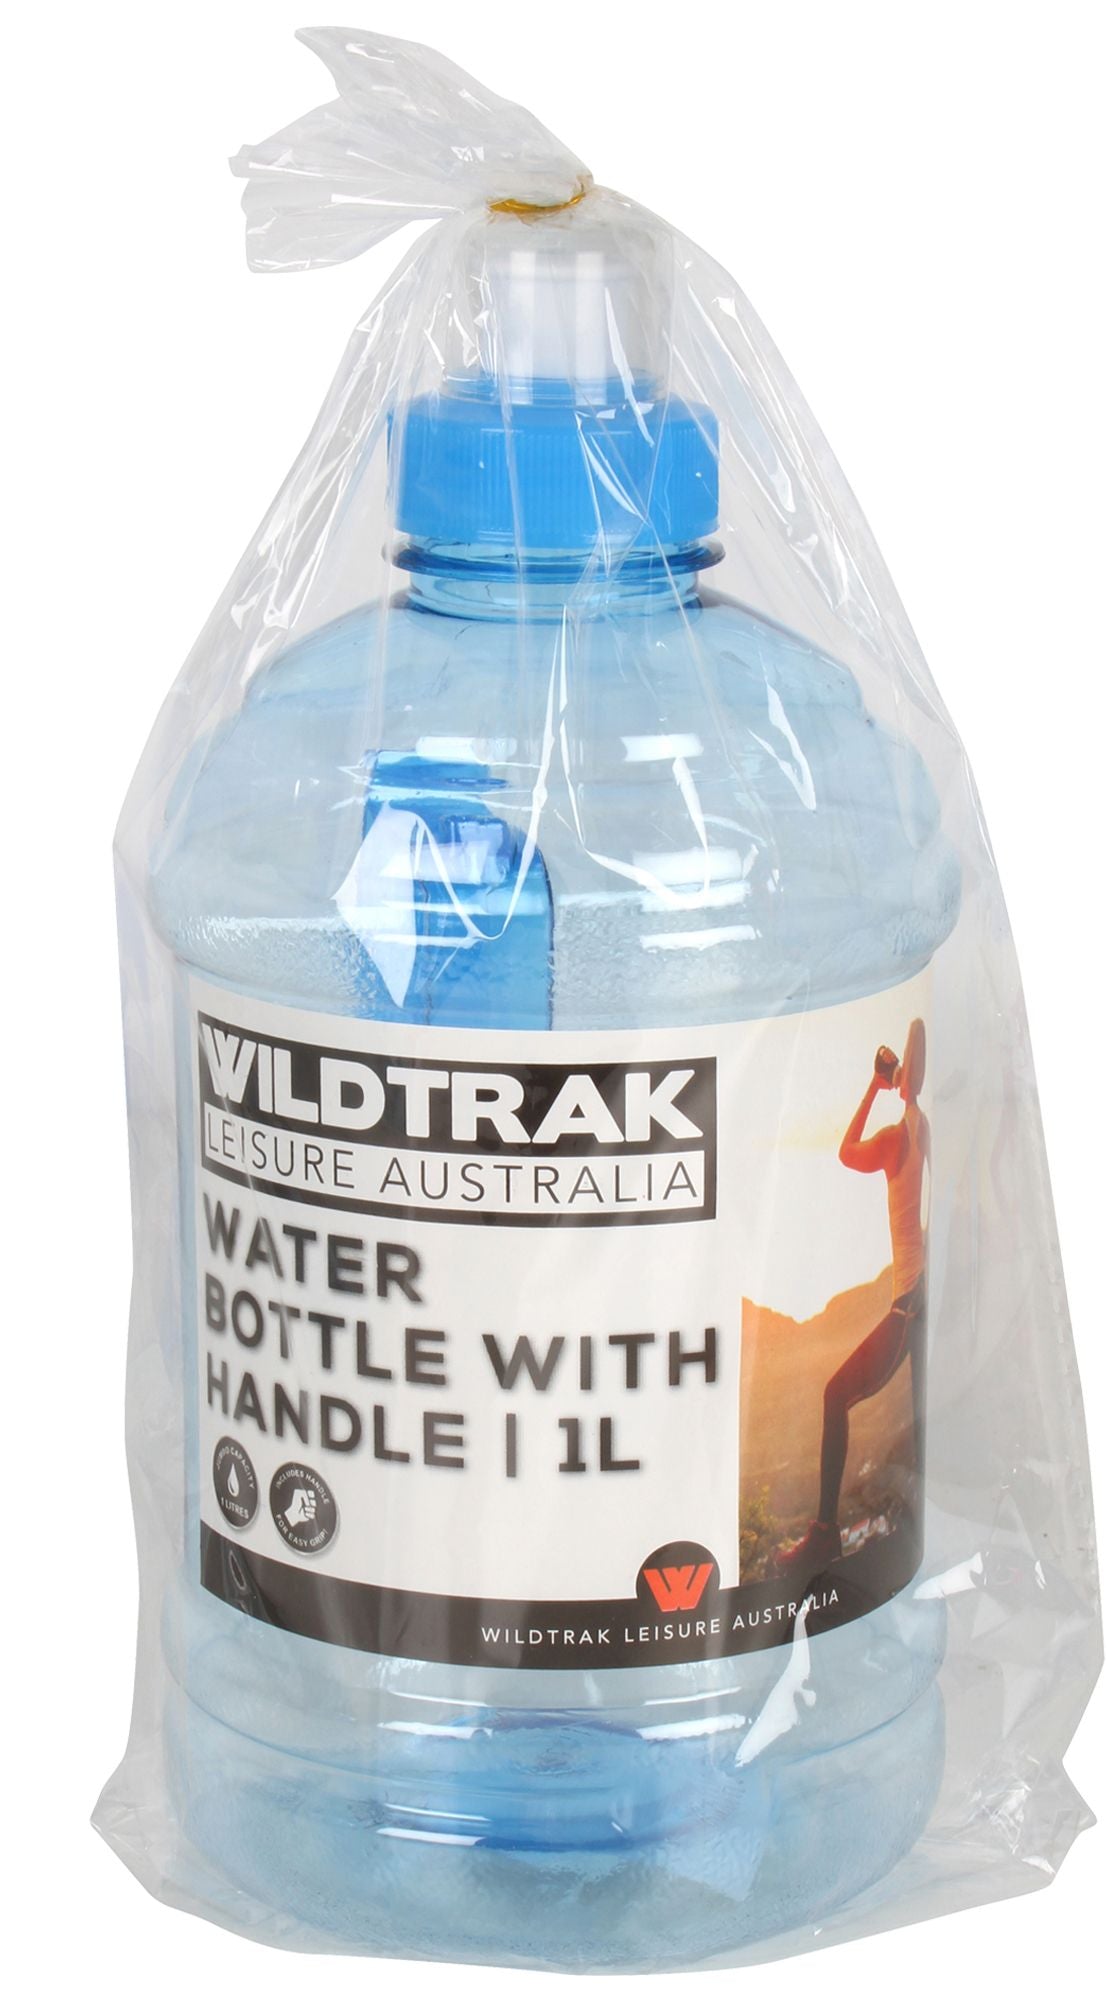 1 LITRE WATER BOTTLE WITH HANDLE